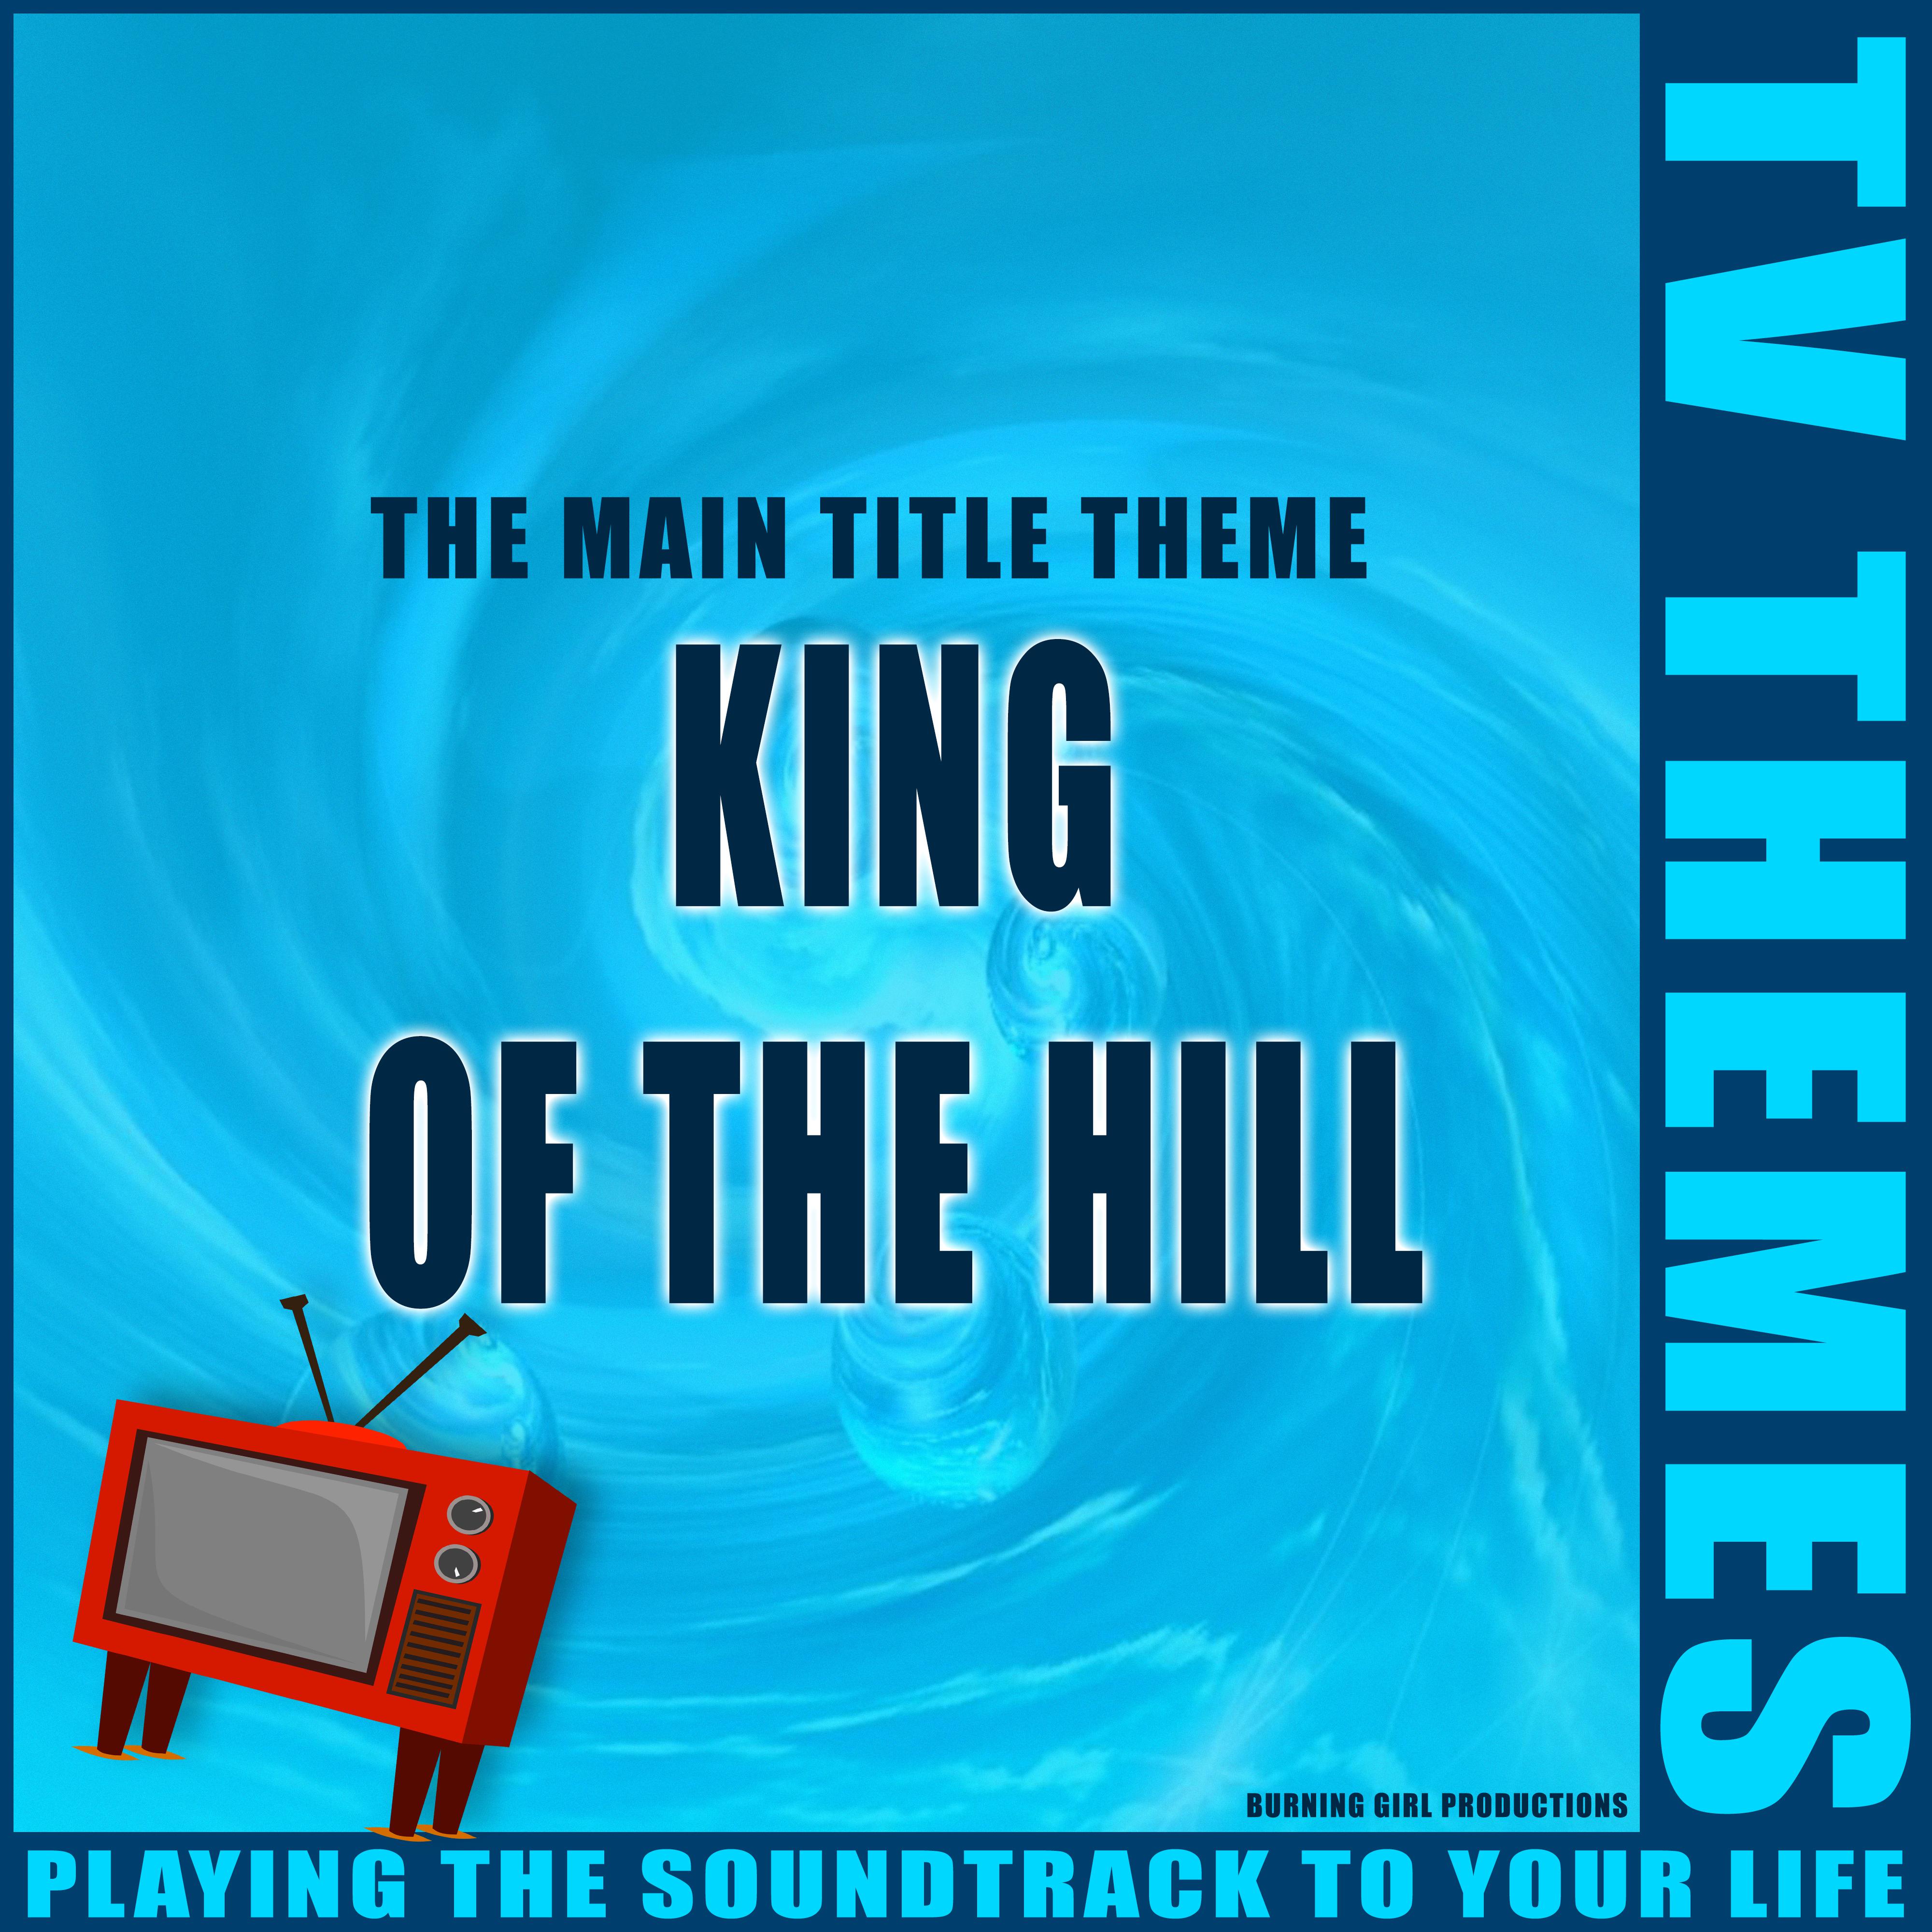 King of the Hill - The Main Title Theme